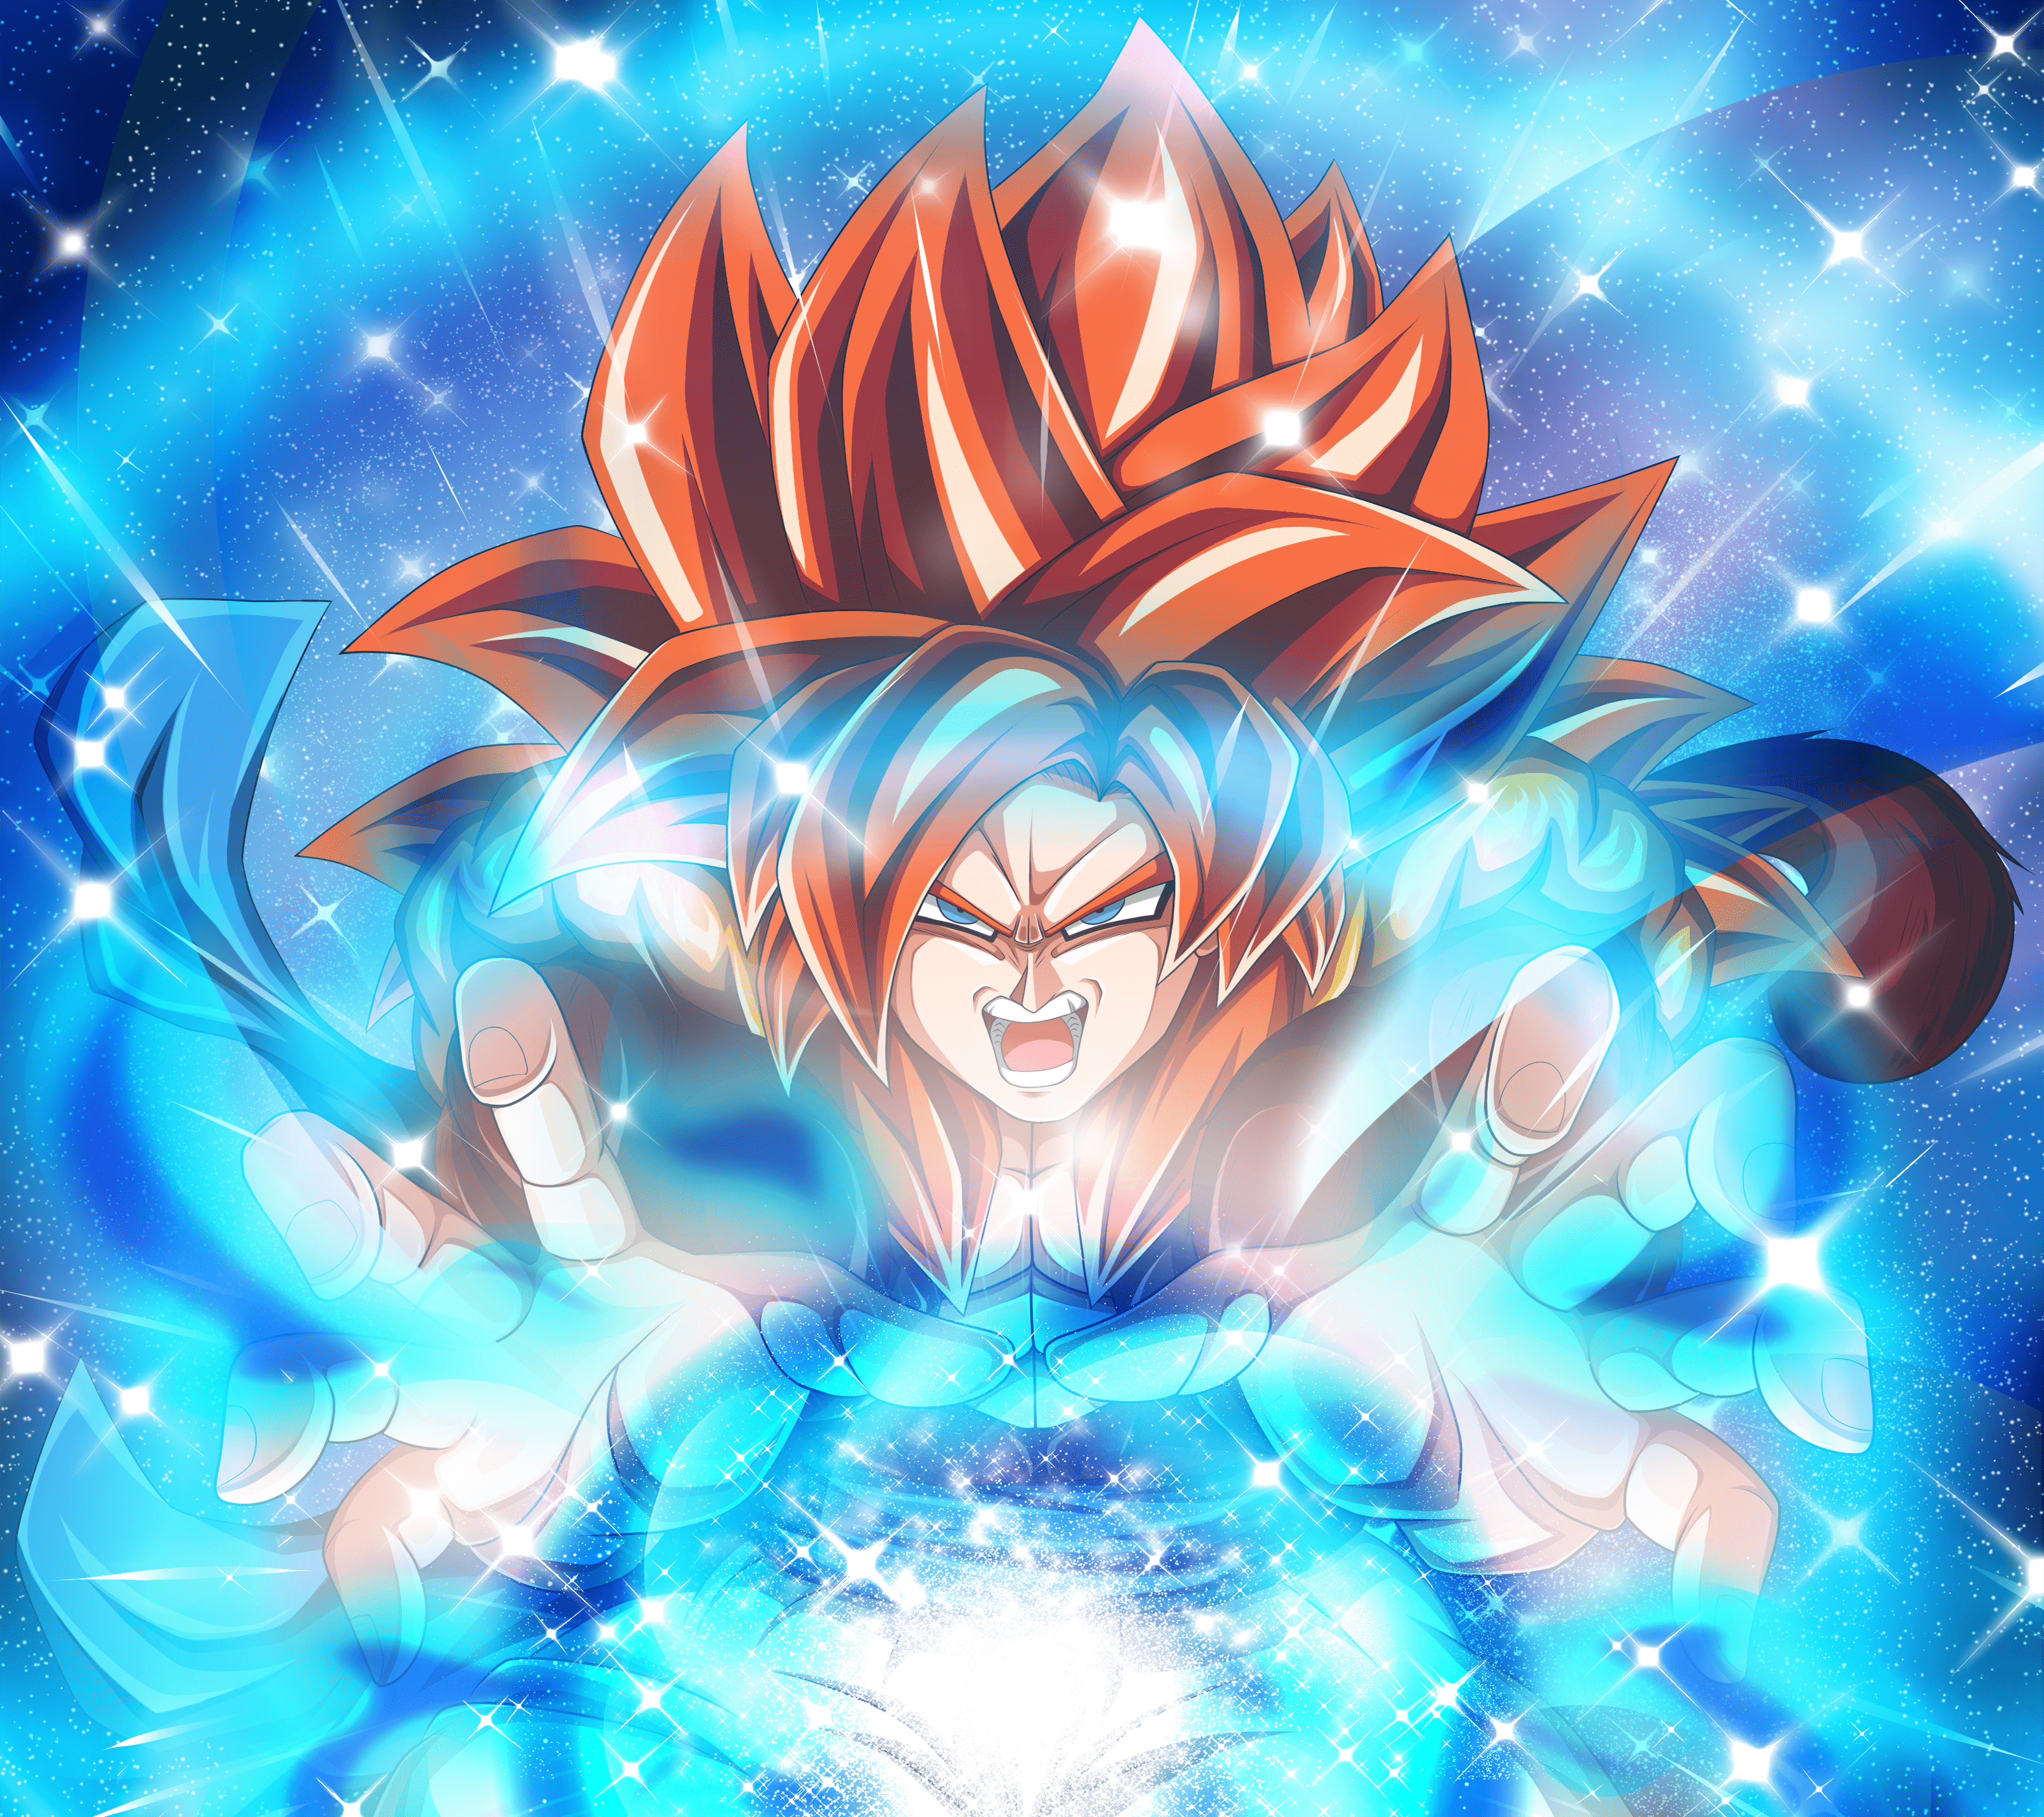 Gogeta ss 4 Animated Picture Codes and Downloads #89918266,421655702